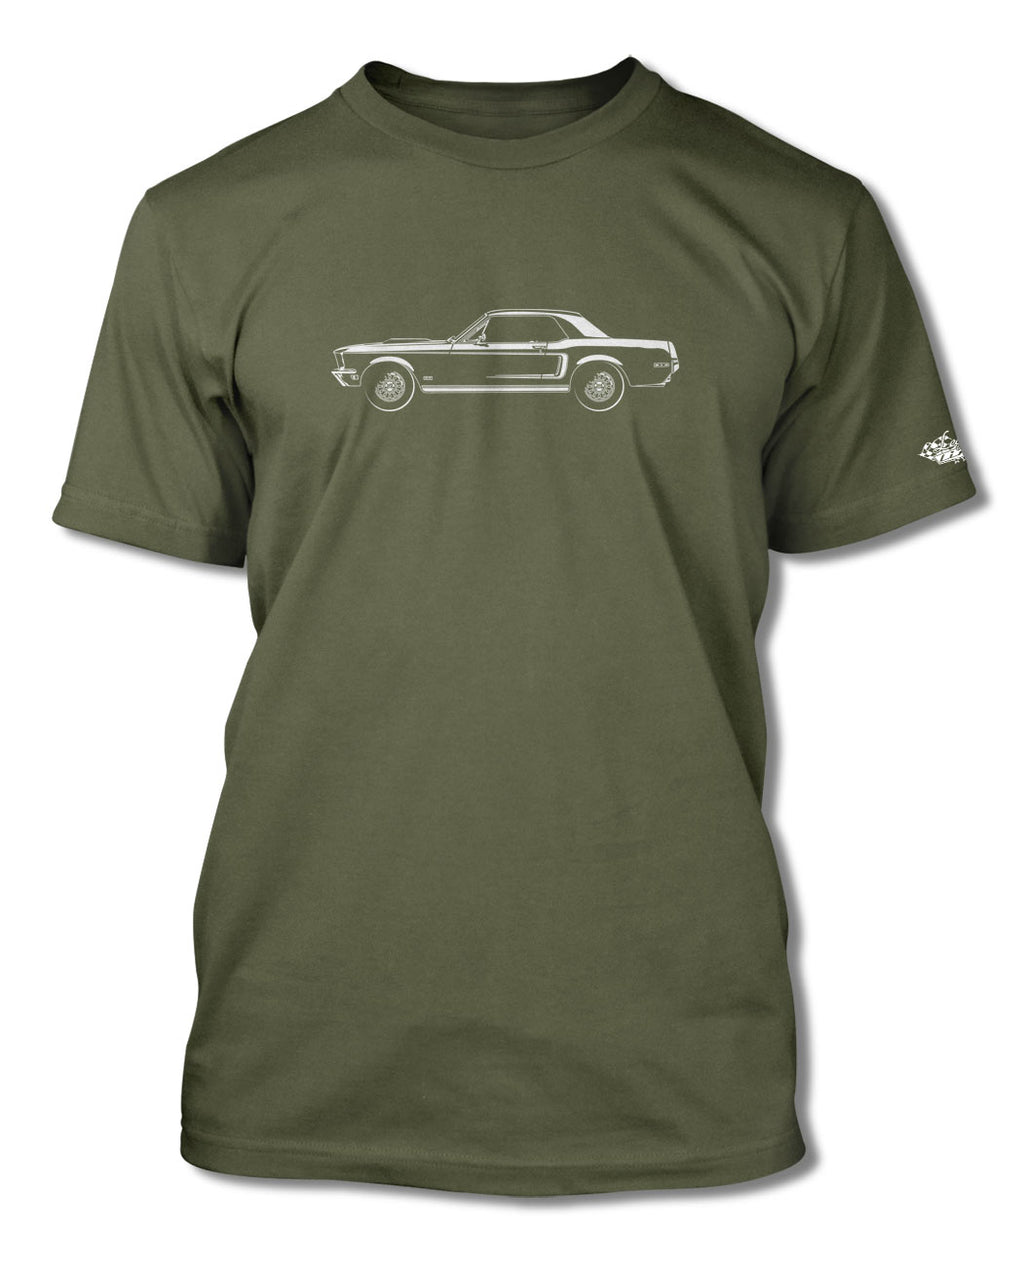 1968 Ford Mustang GT Coupe with Stripes T-Shirt - Men - Side View